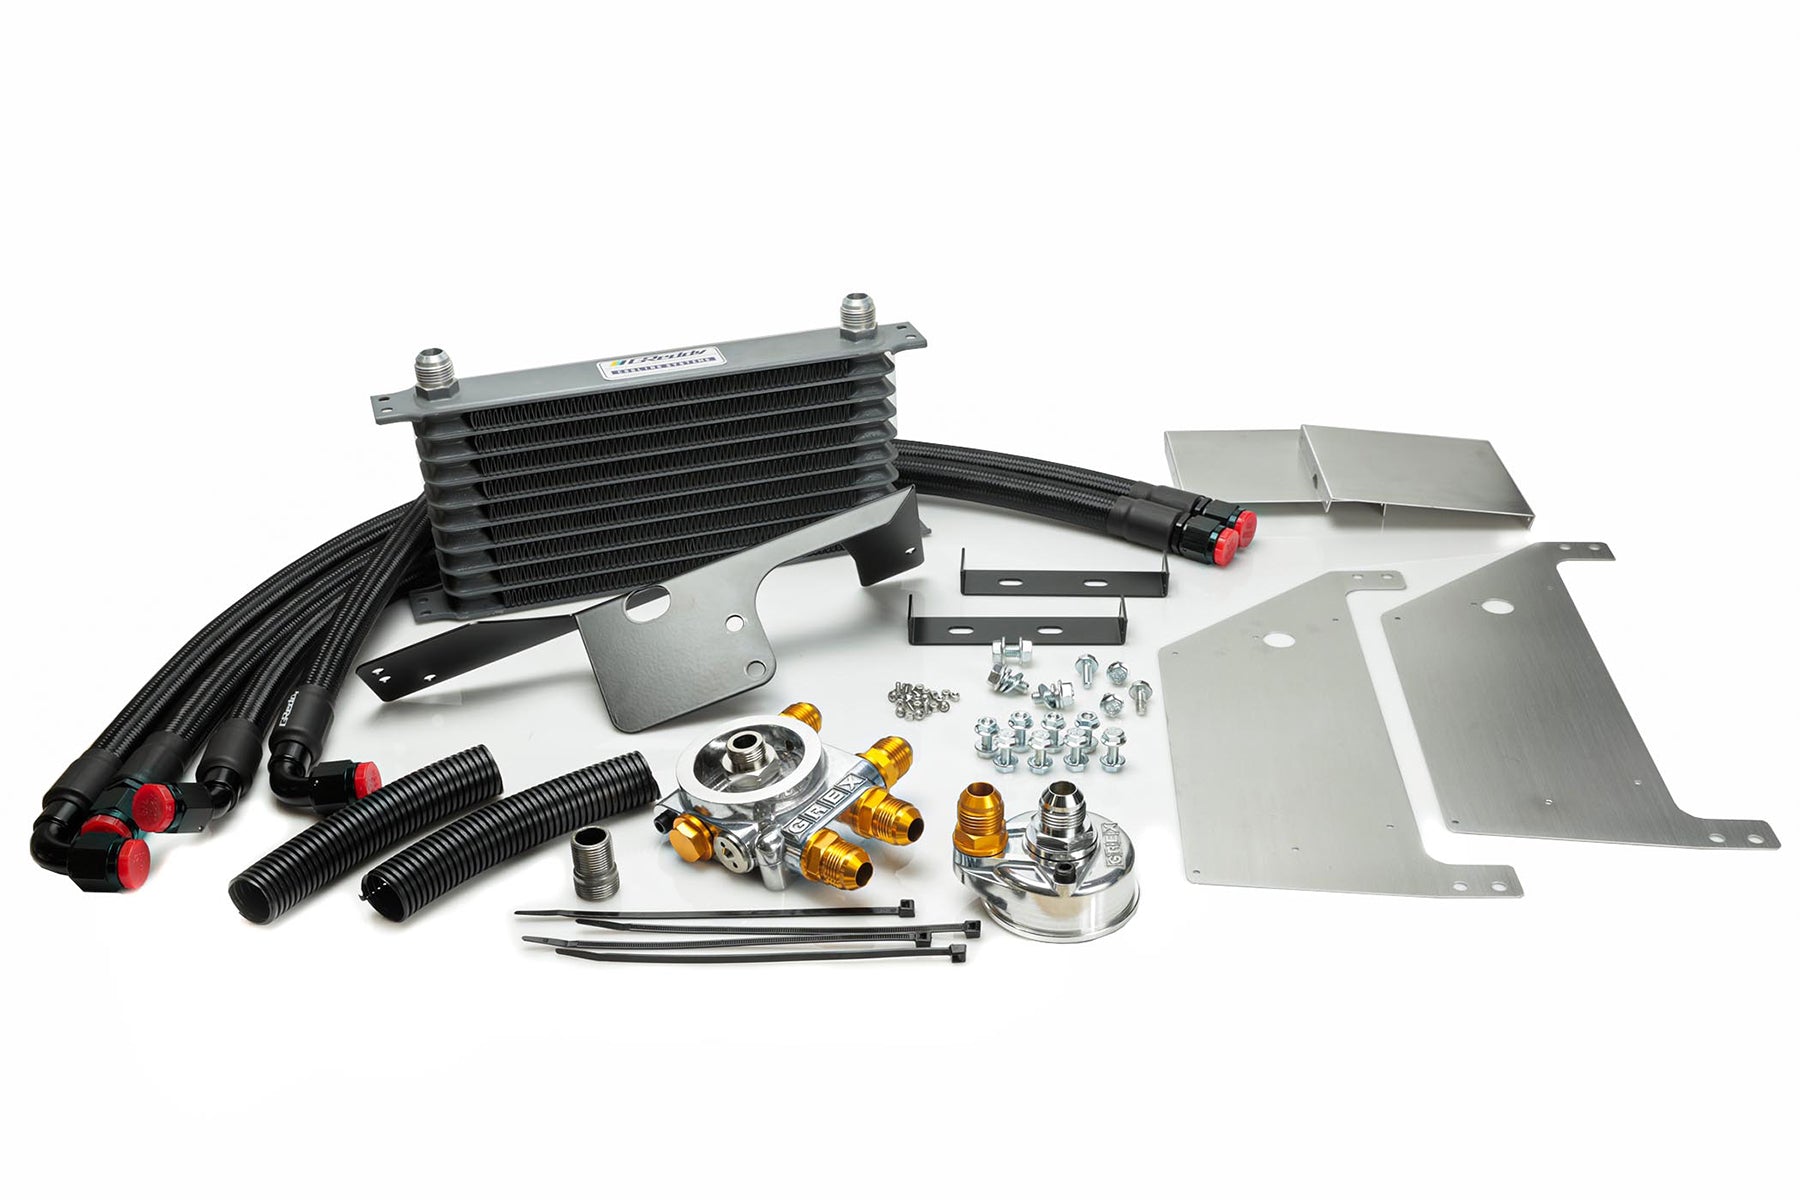 OIL COOLER KIT 10-ROW W/ FILTER RELO. AND SHROUD - S2000 AP1/2 - (12058005)